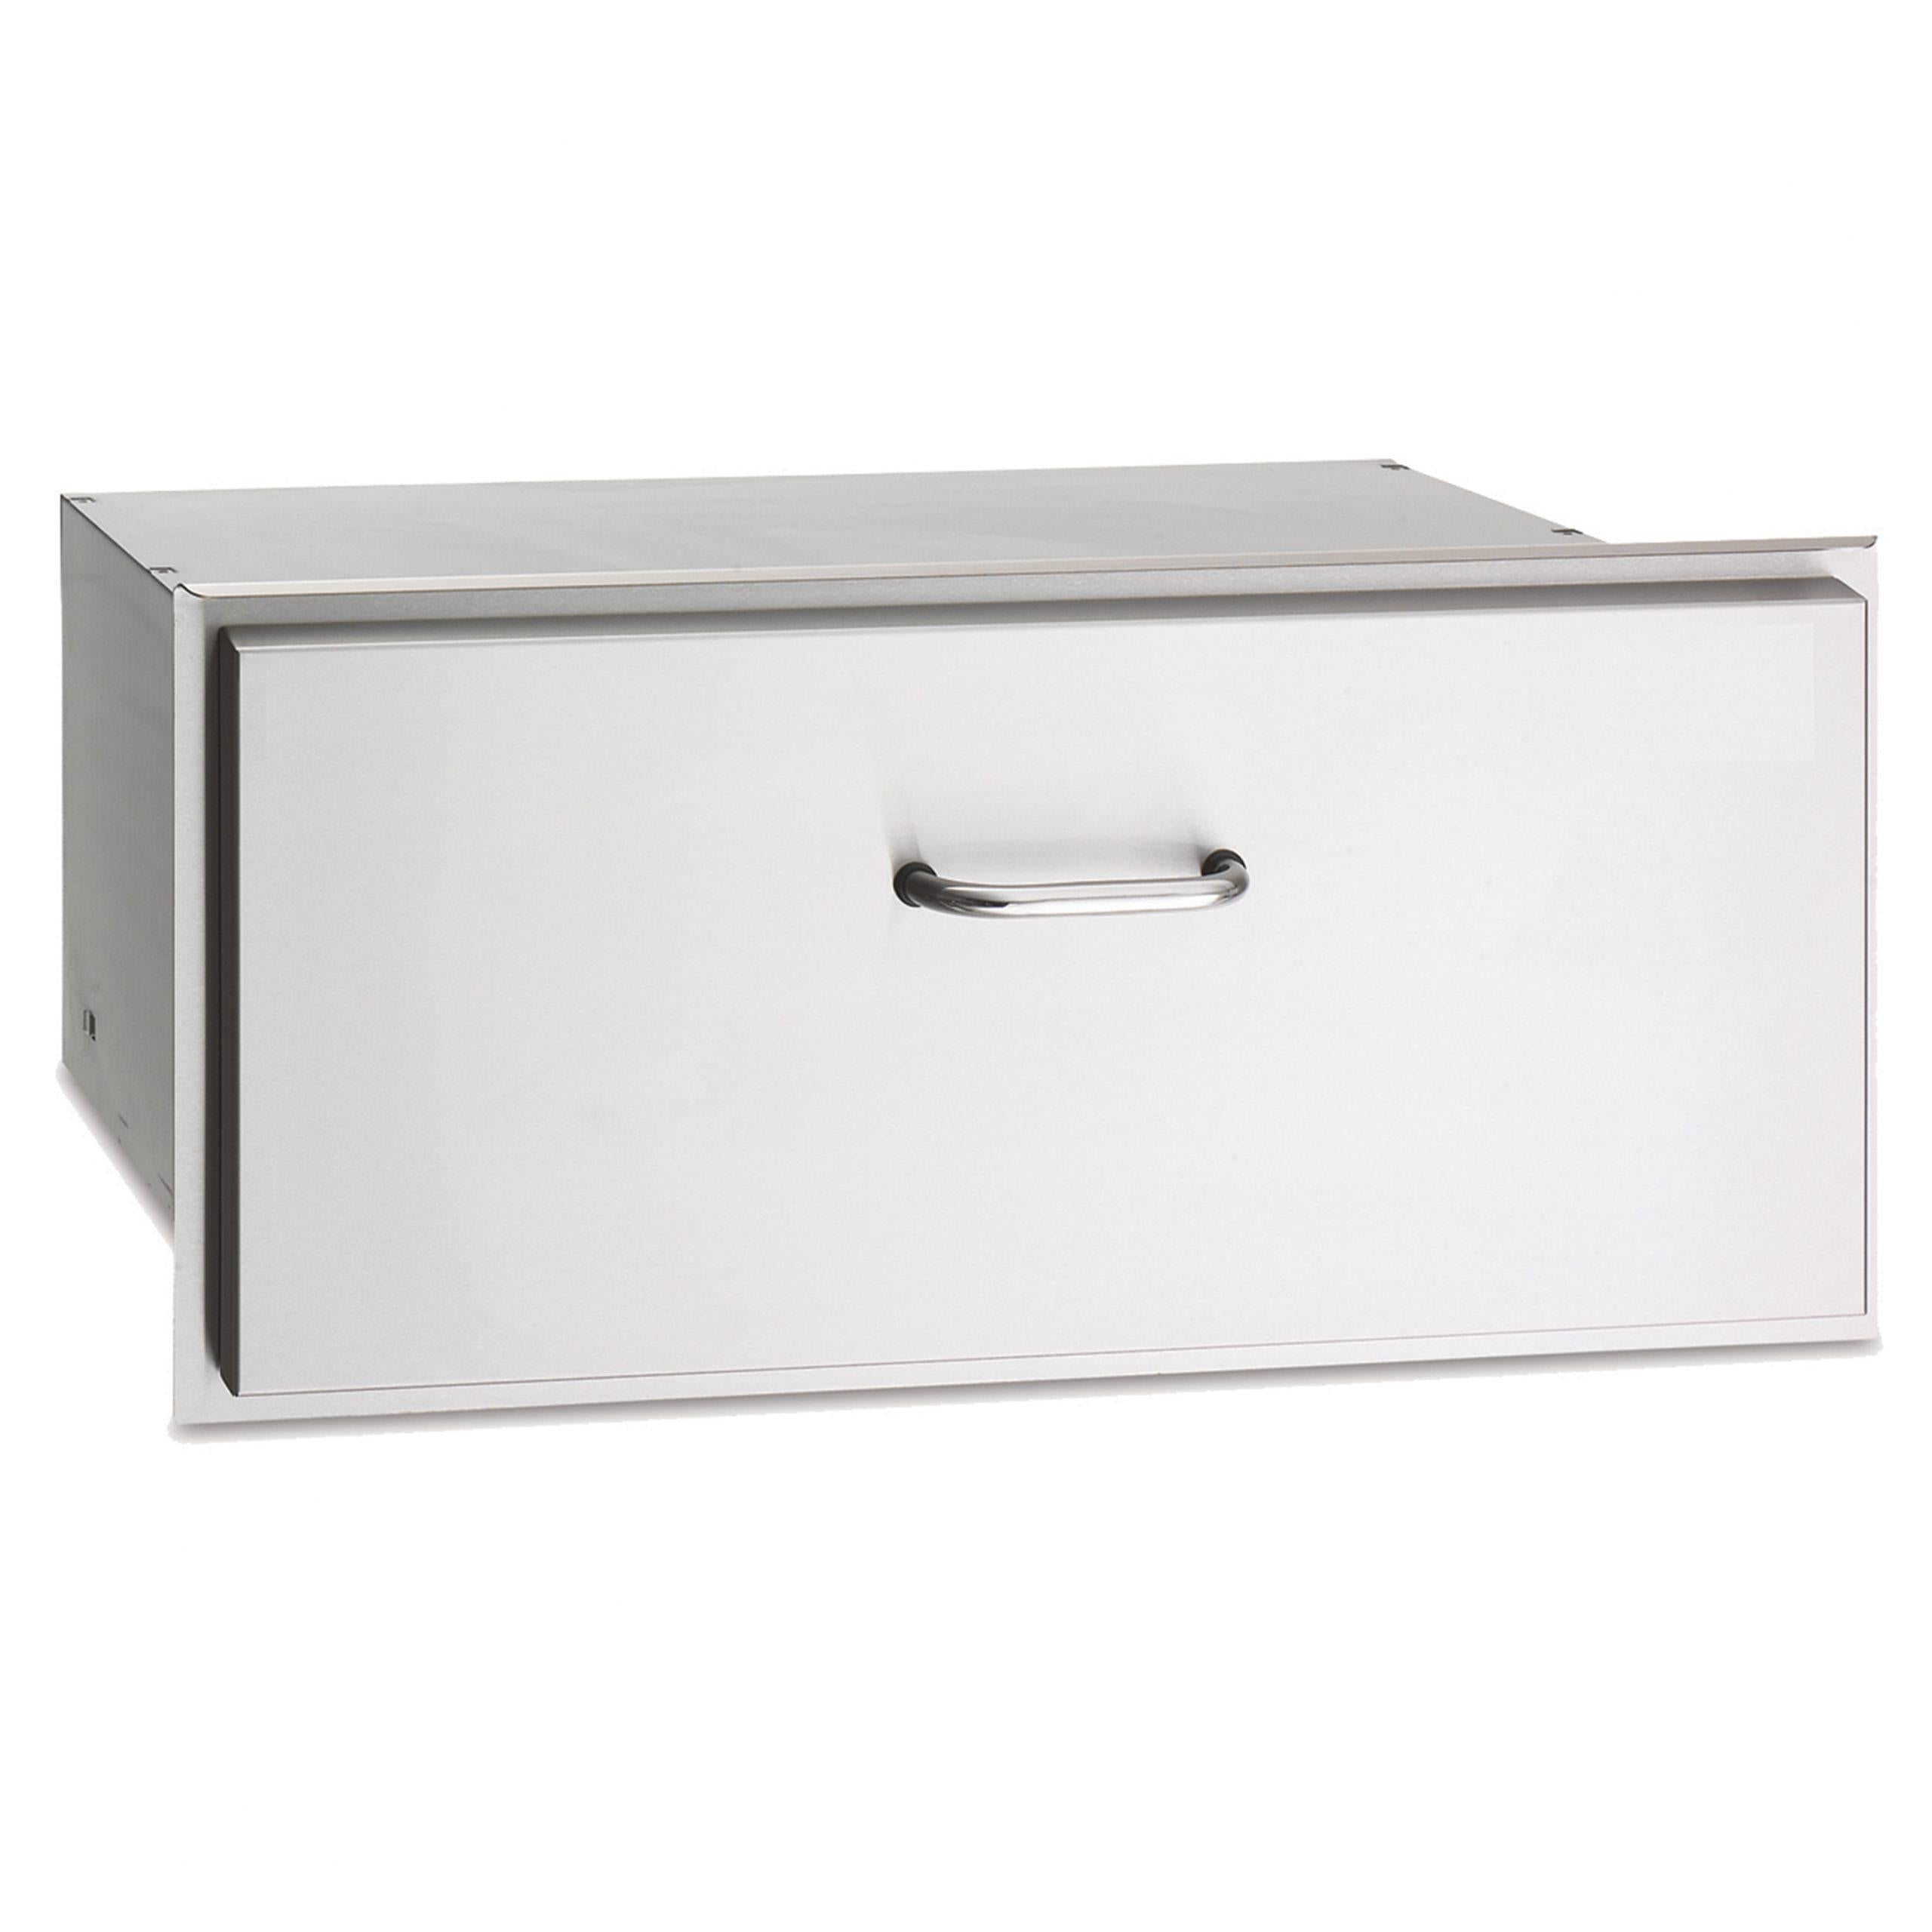 Fire Magic 33830S Select Large Utility Drawer